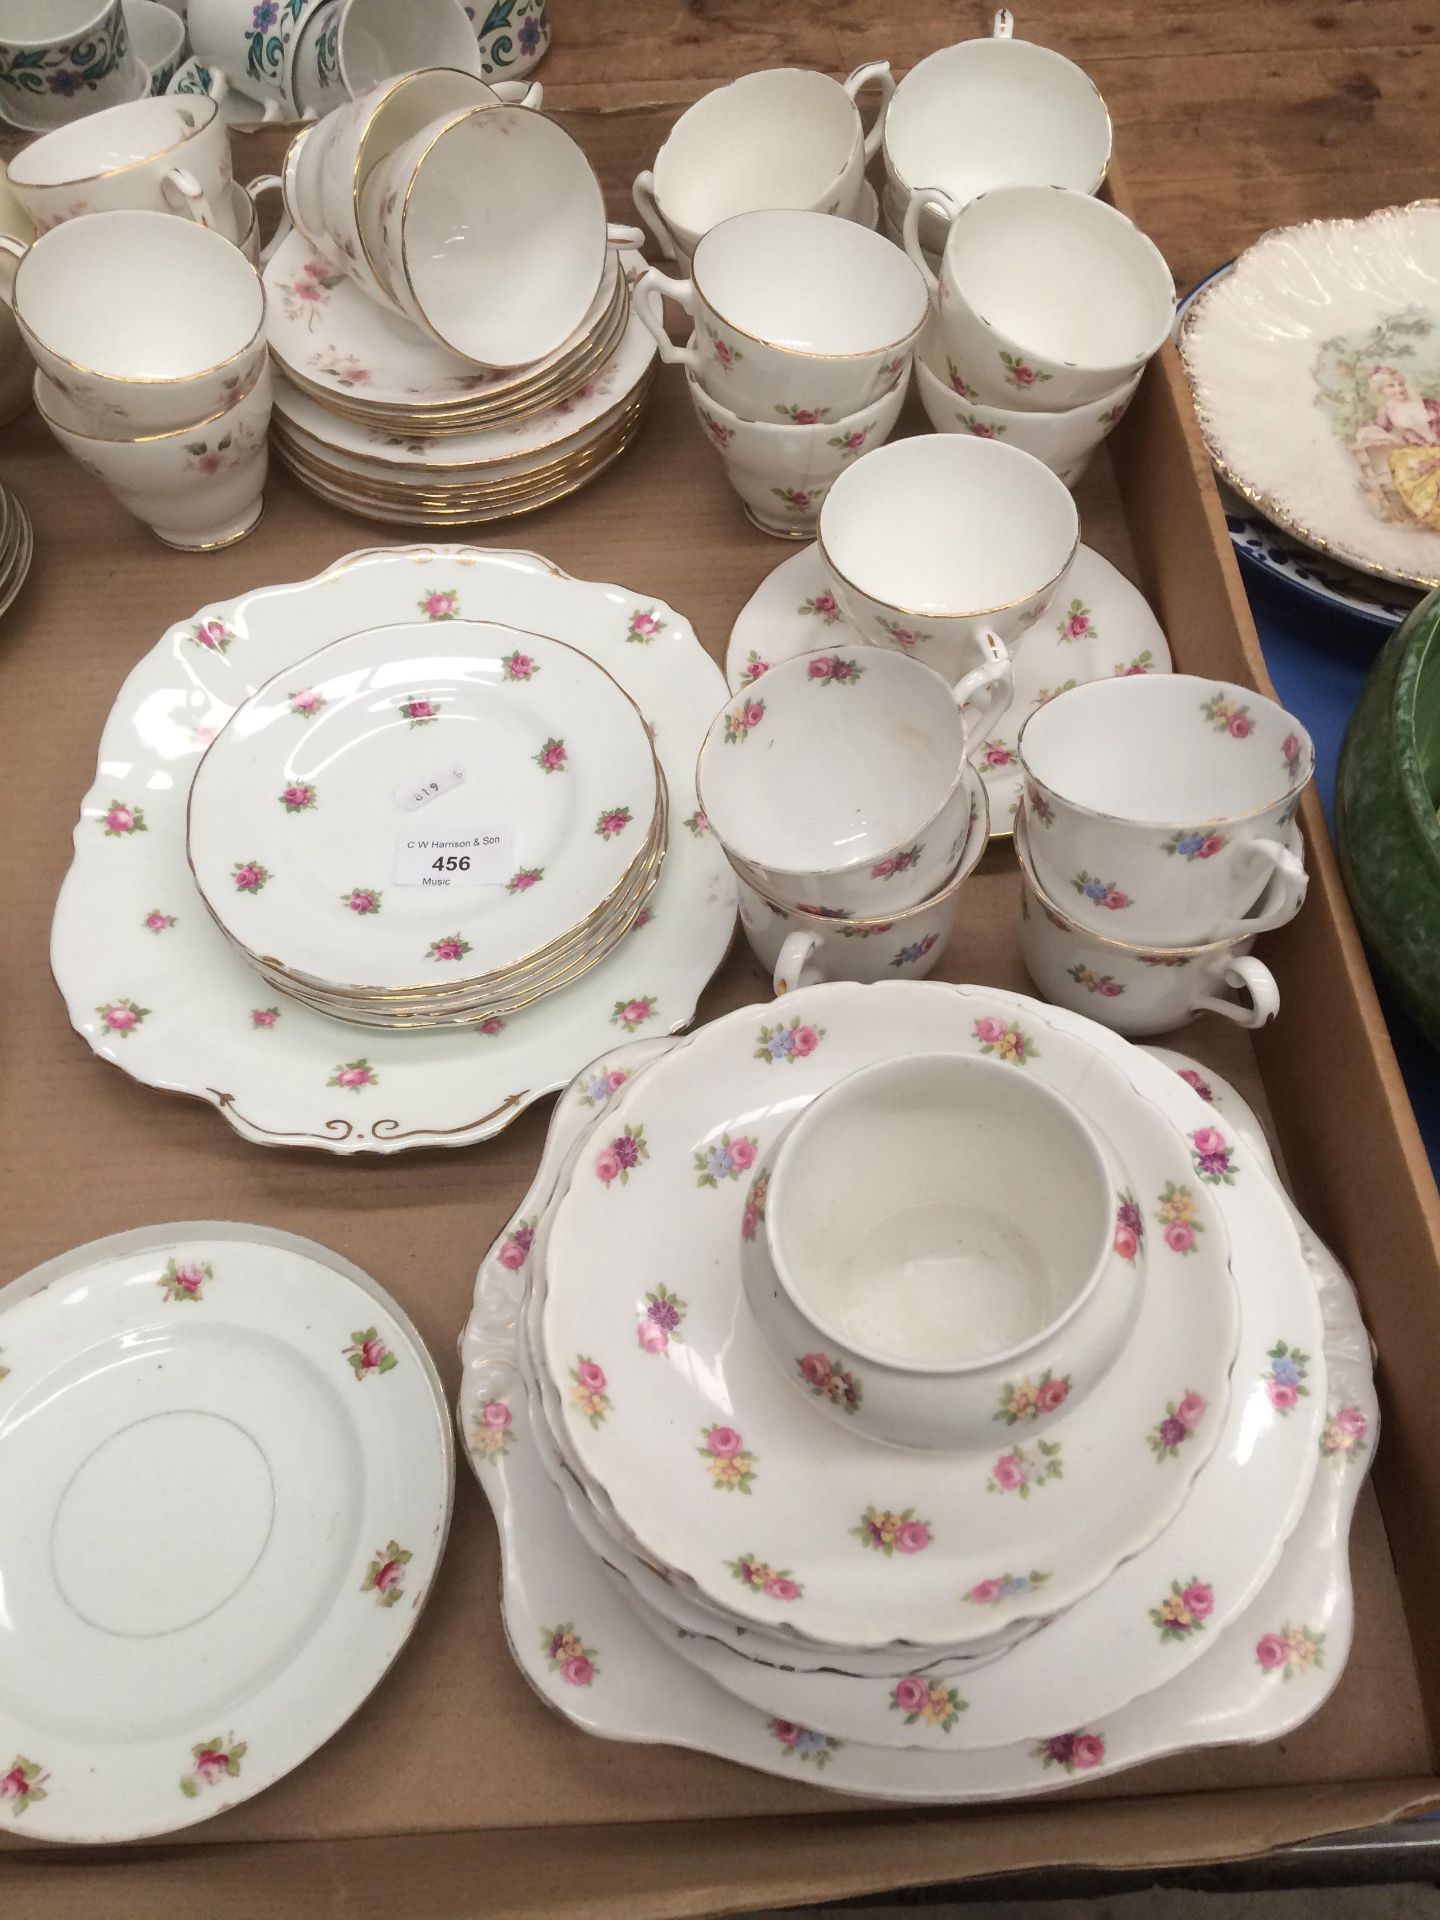 Approximately 48 pieces of red floral patterned tea services in three different styles